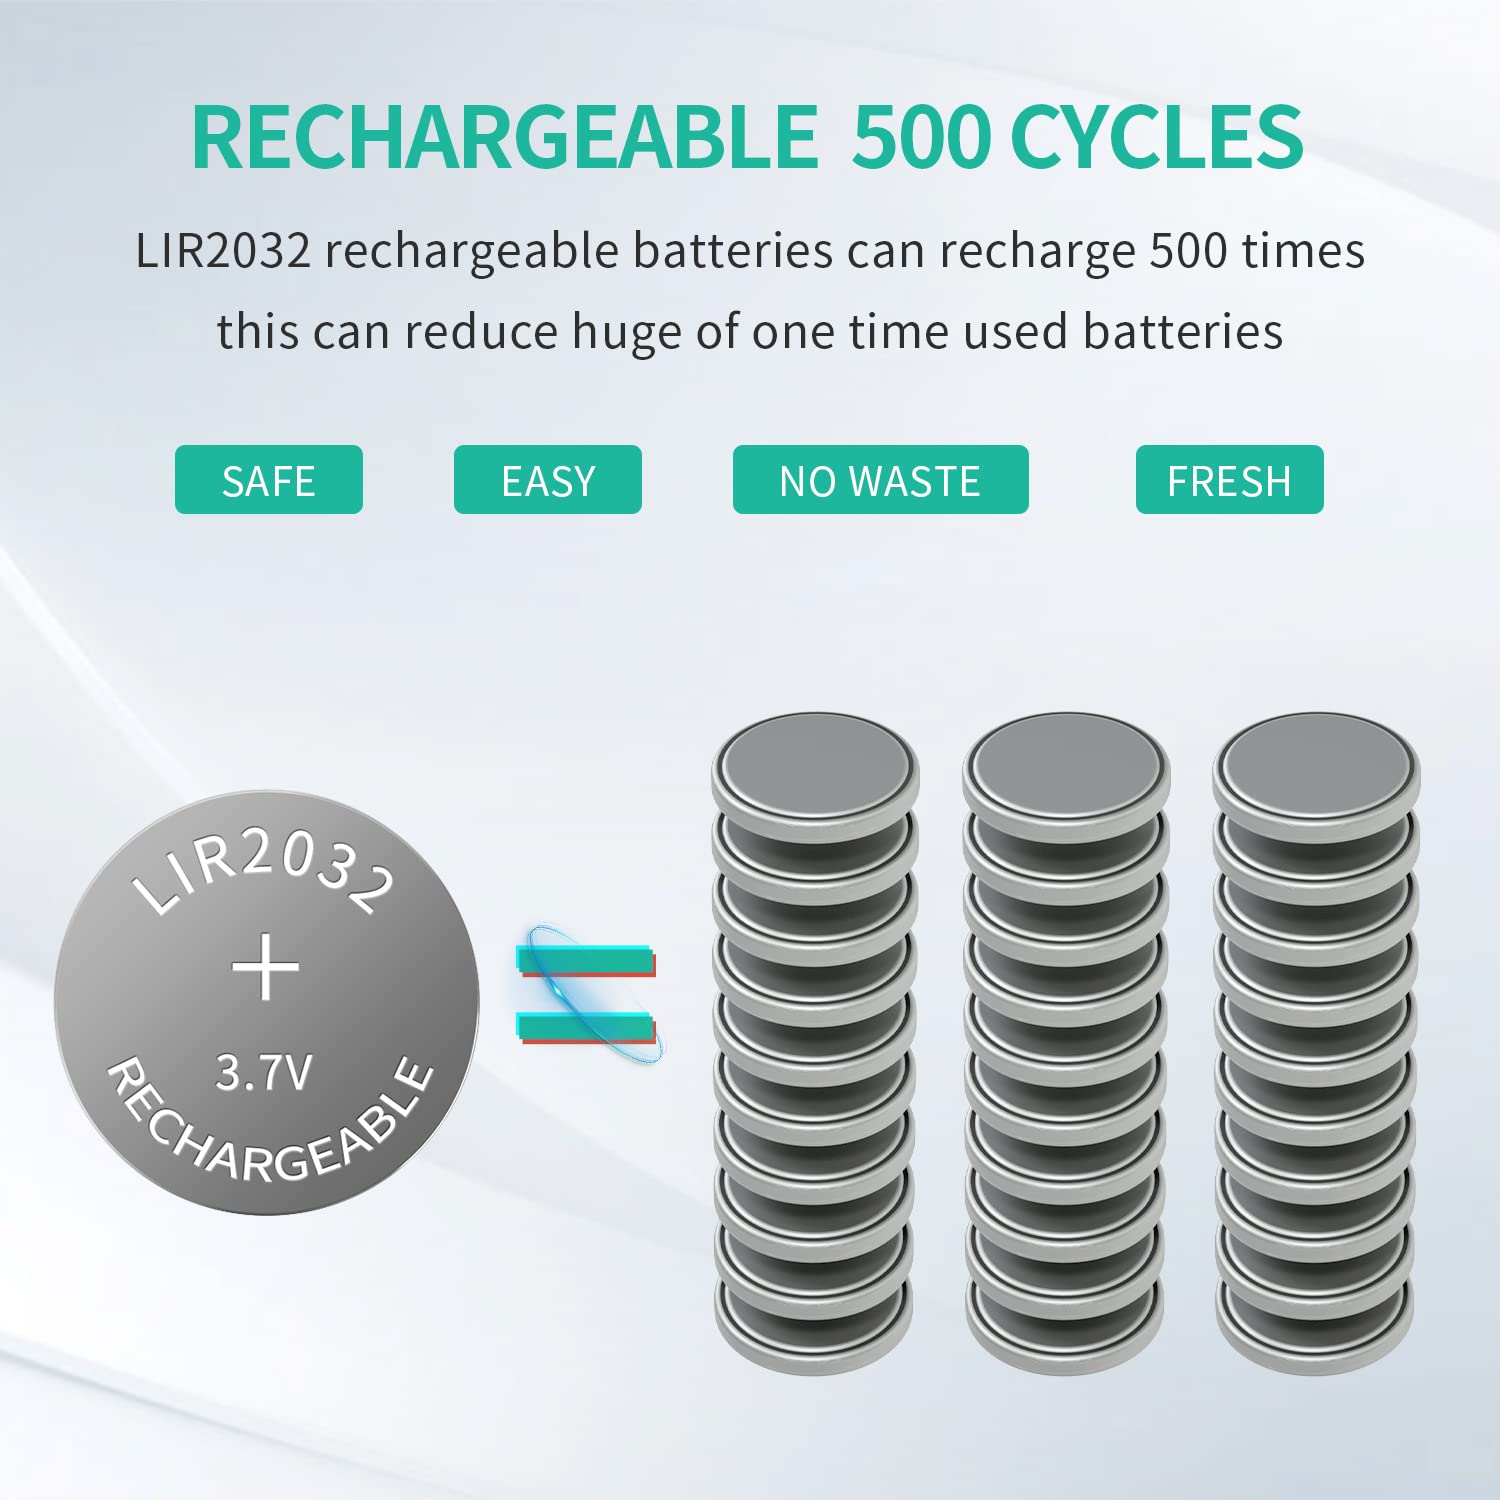 LP 2032 Rechargeable Battery Charger Pack DC 4.2V 50mA Fast Charging with 4PCS 3.7V 80mAh High Capacity Compatible with LIR2032 2025 2016 2430 2440 2450 2466 2477 1620 1632 Lithium Button Batteries